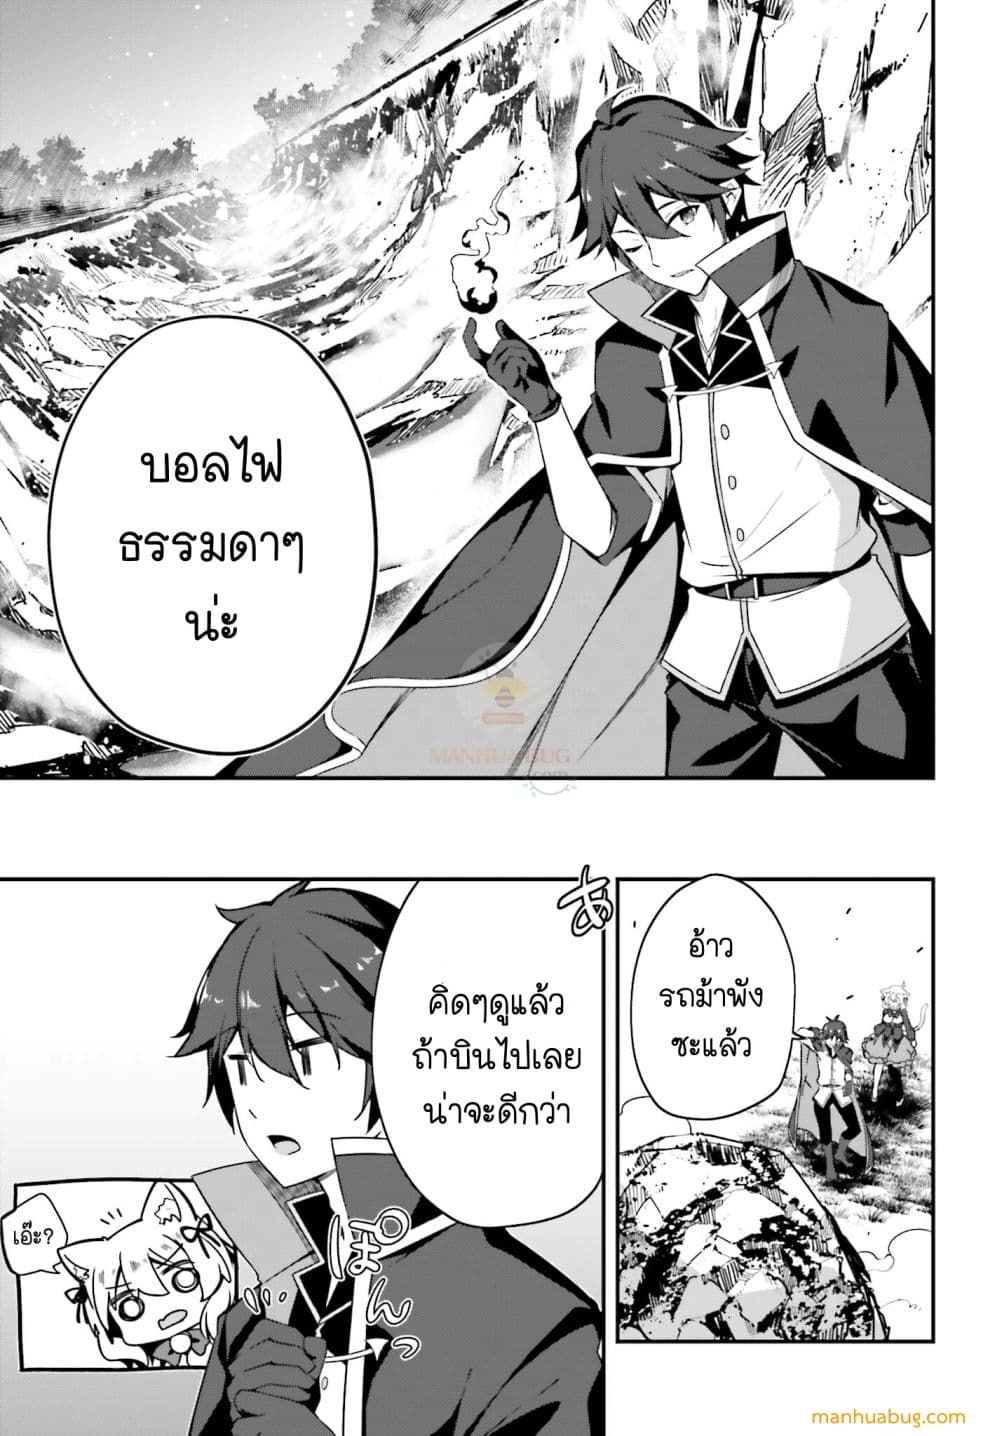 THE INCOMPETENT PRINCE WHO HAS BEEN BANISHED WANTS TO HIDE HIS ABILITIES~ ตอนที่ 1 (37)